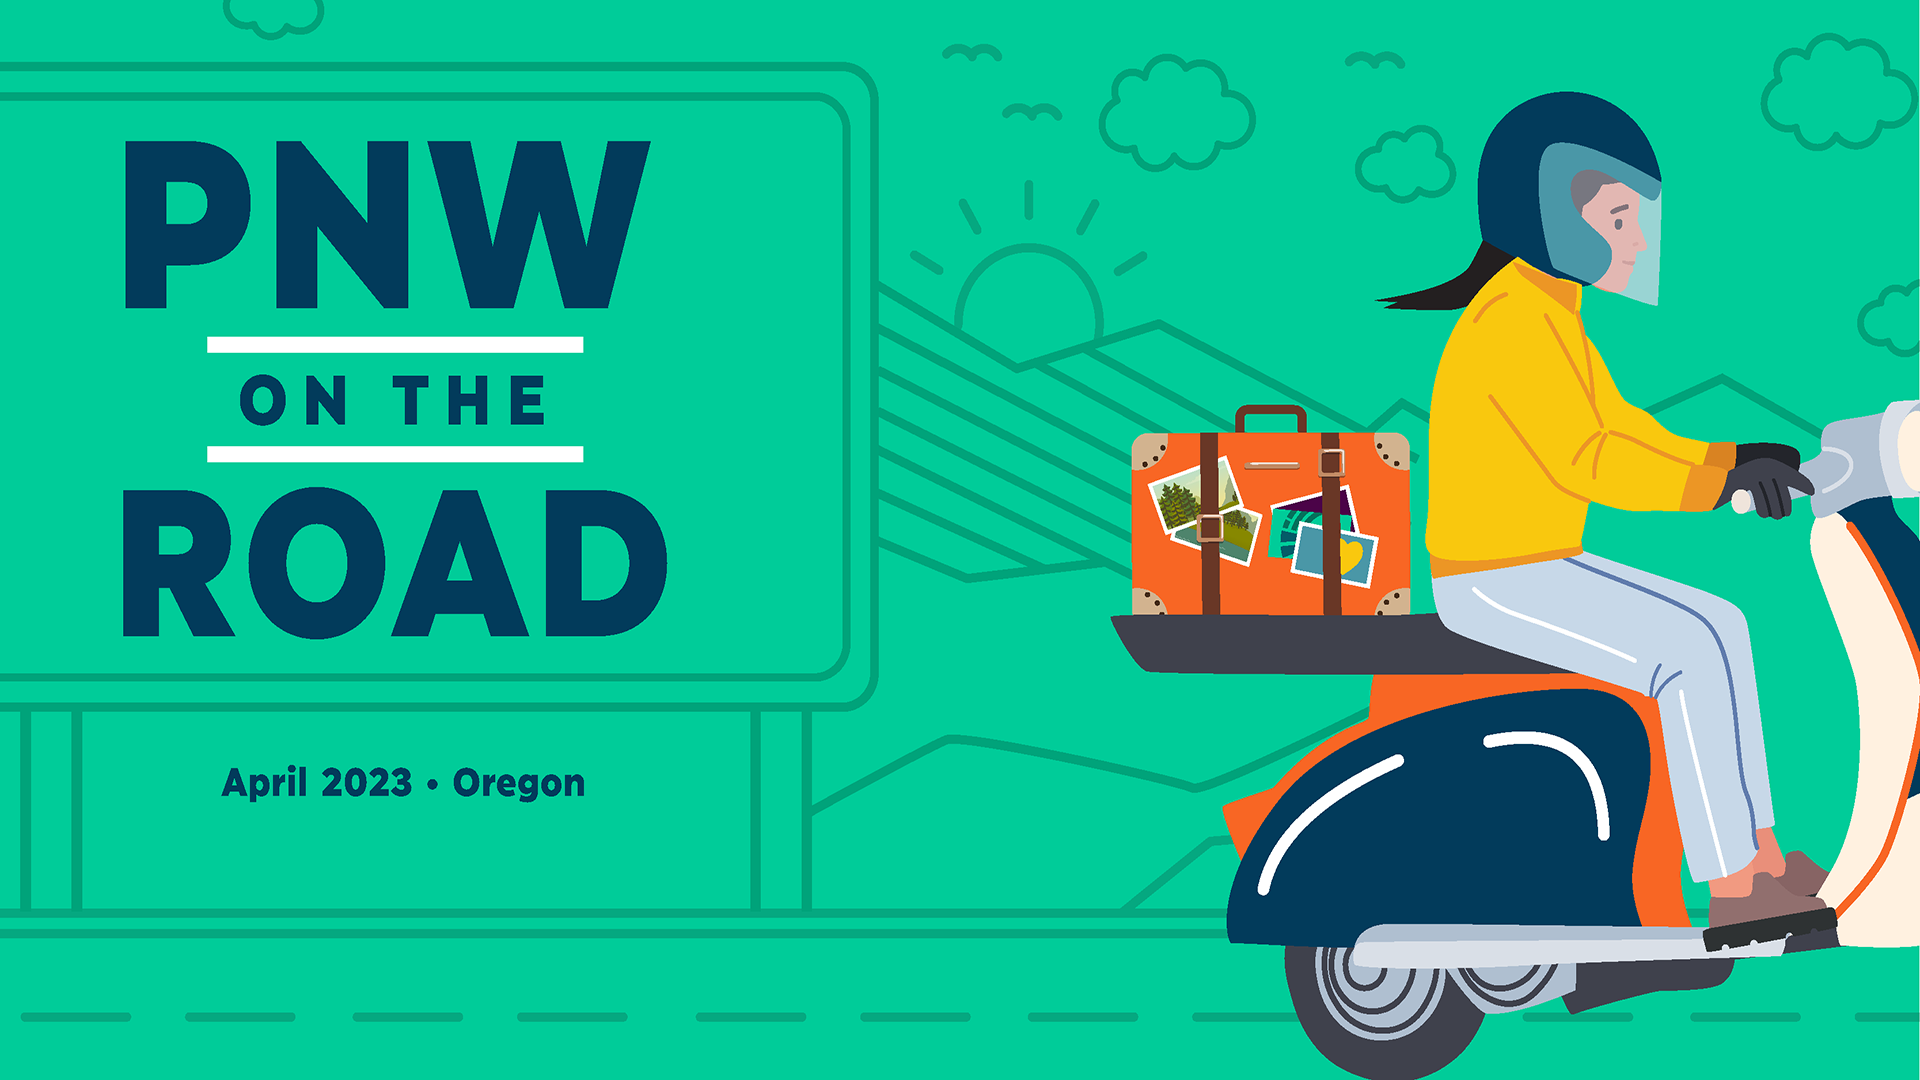 Emerald green graphic that reads "PNW on the Road, April 2023, Oregon" and had a cartoon of a woman on a Vespa with a suitcase on the back with Pacific Northwest themed stickers.